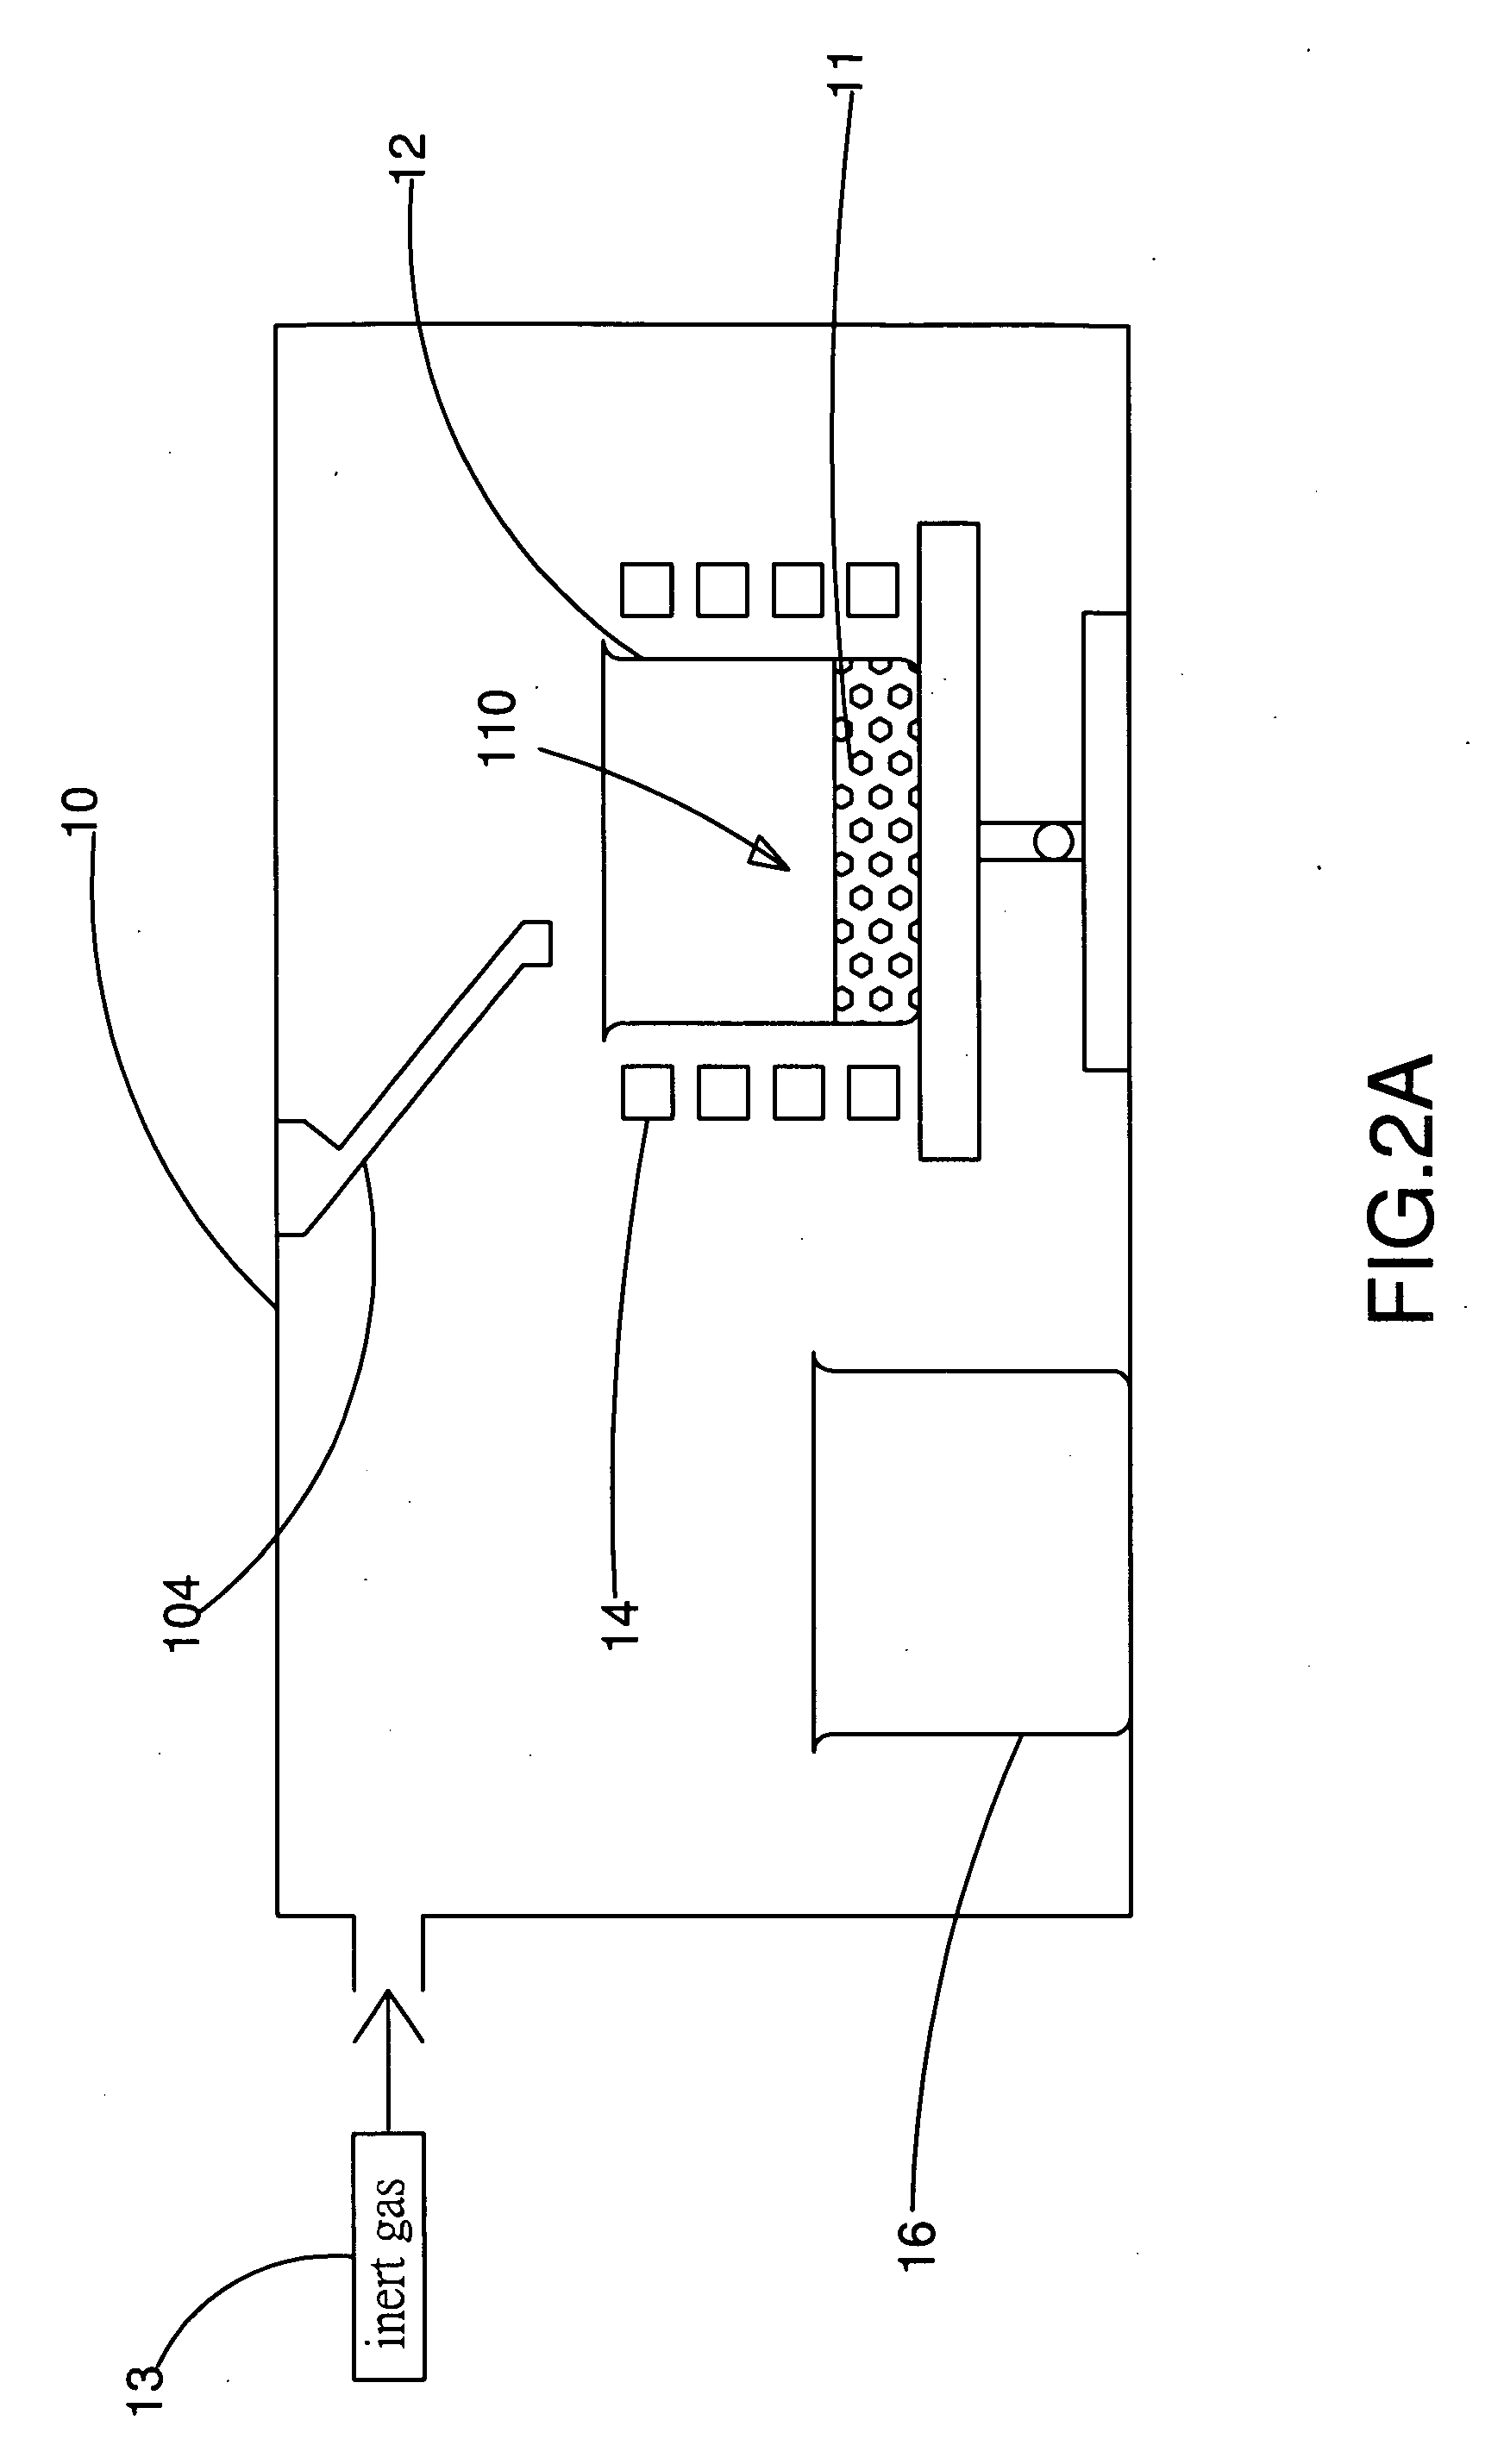 Method and Apparatus for Manufacturing High-Purity Alloy